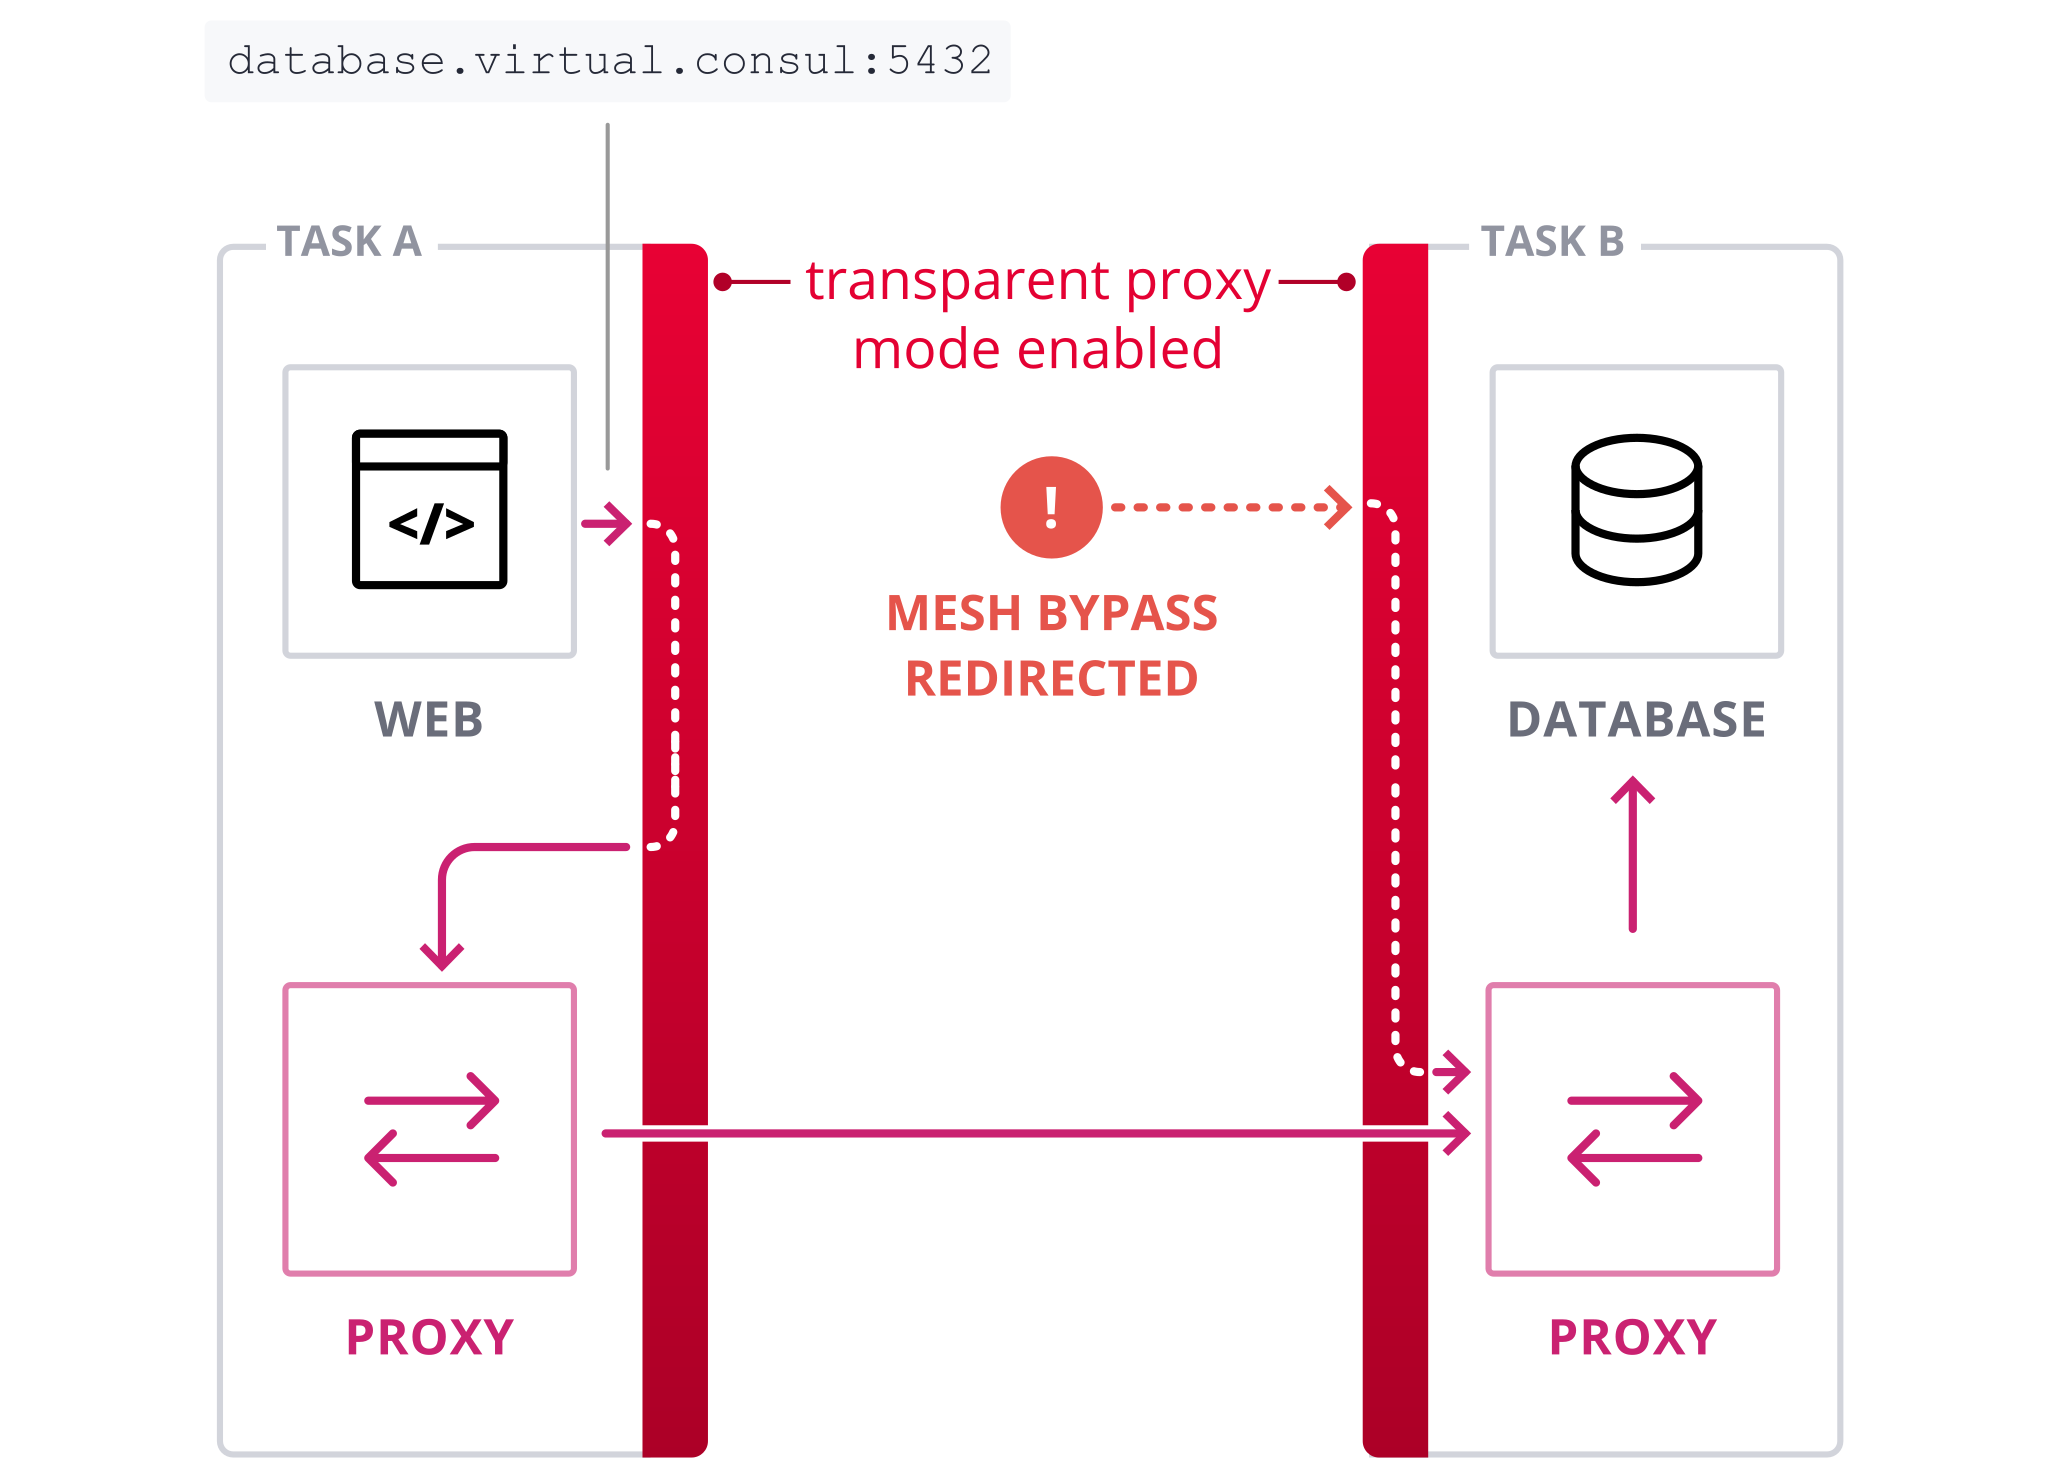 This diagram shows that if a downstream service attempts to directly access the ‘database’ service, such as with an AWS Cloud Map DNS lookup, transparent proxy mode redirects that traffic through its sidecar to ensure that service mesh policies are enforced.